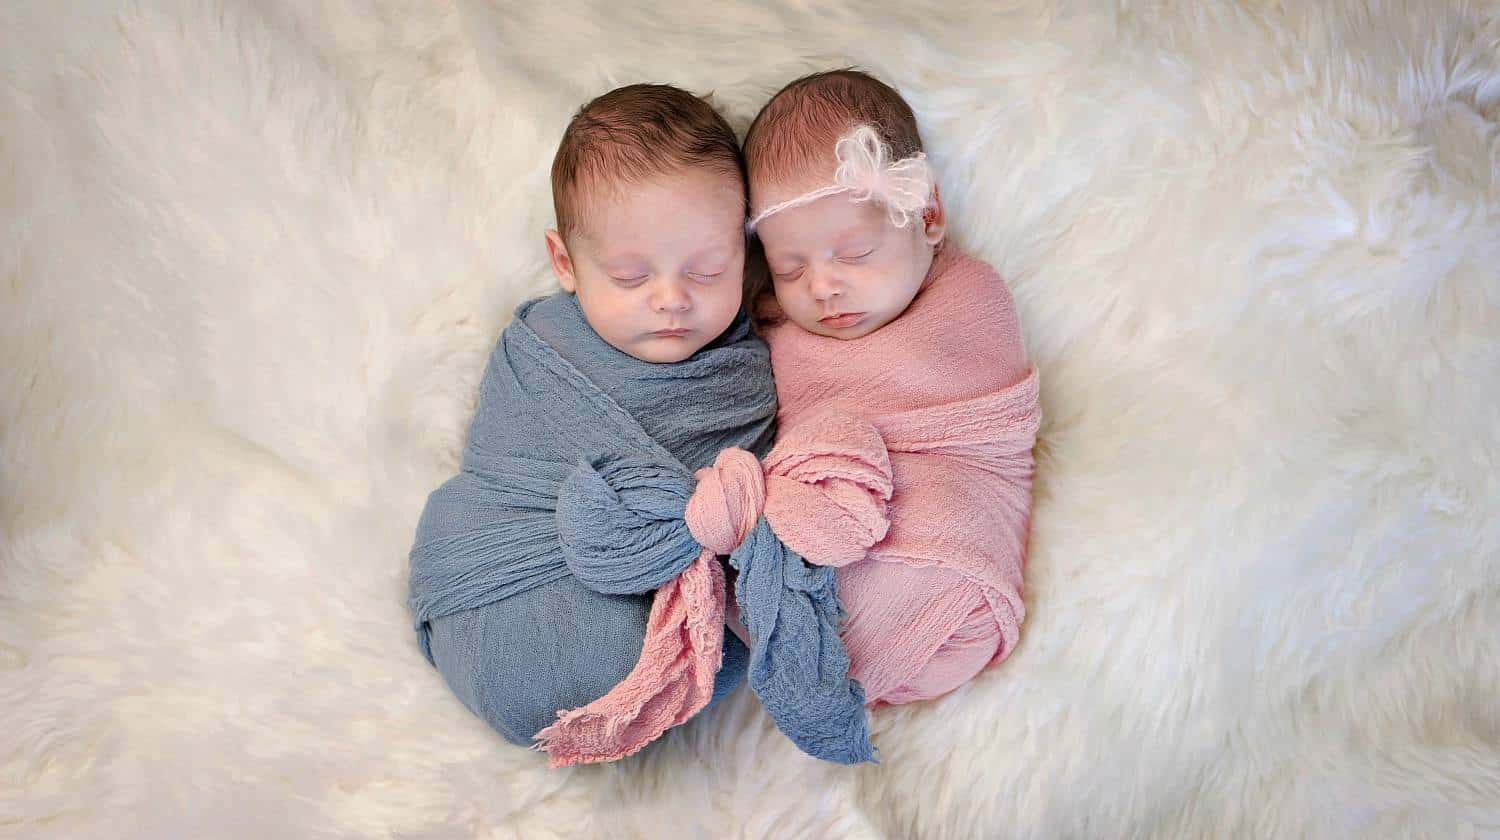 Feature | Sleeping boy and girl fraternal twin swaddled together in pink and blue wraps that are tied together in a bow | Do's and Dont's For Swaddling Your Newborn Baby